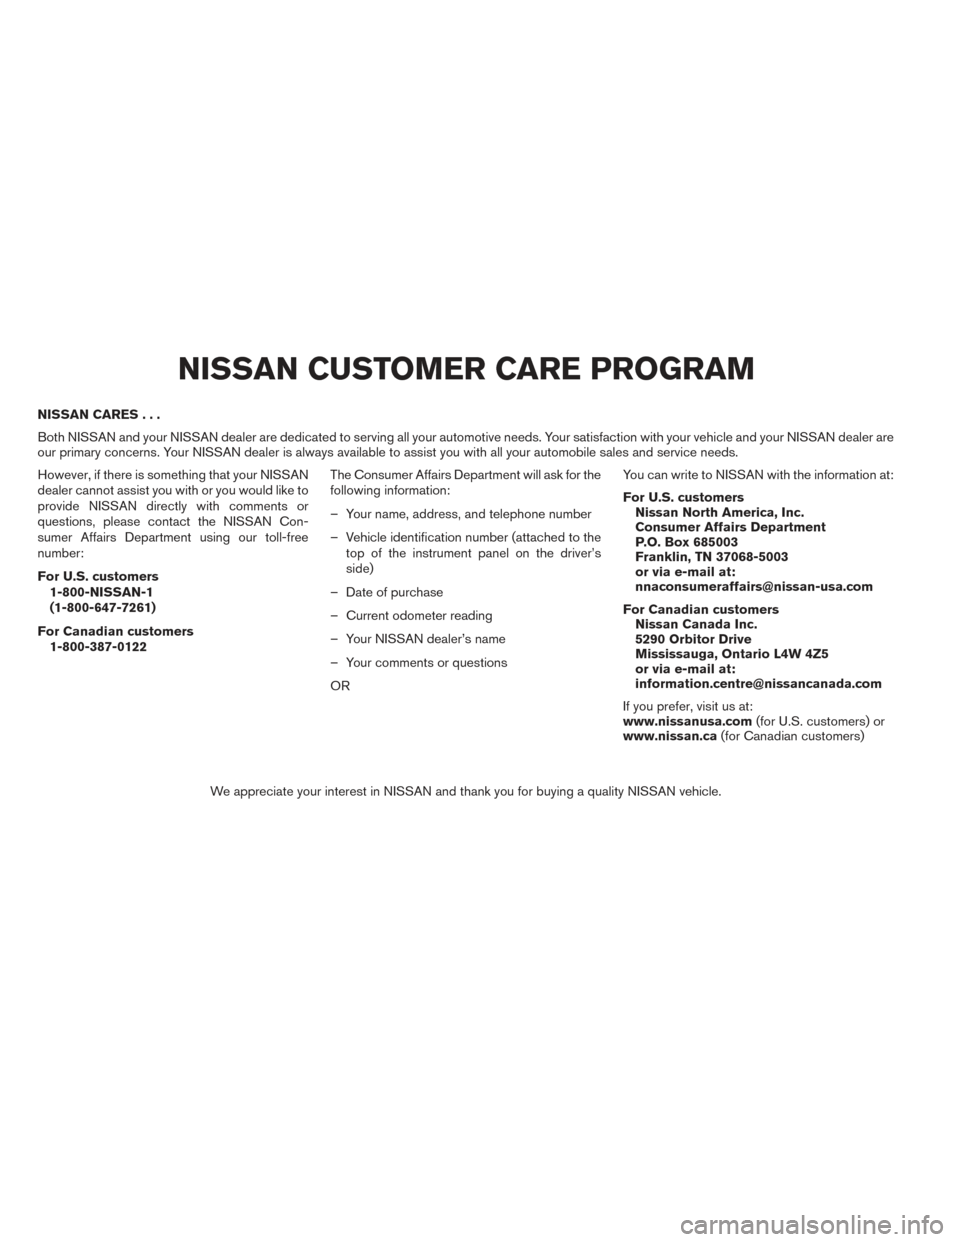 NISSAN PATHFINDER HYBRID 2014 R52 / 4.G Owners Manual NISSAN CARES...
Both NISSAN and your NISSAN dealer are dedicated to serving all your automotive needs. Your satisfaction with your vehicle and your NISSAN dealer are
our primary concerns. Your NISSAN 